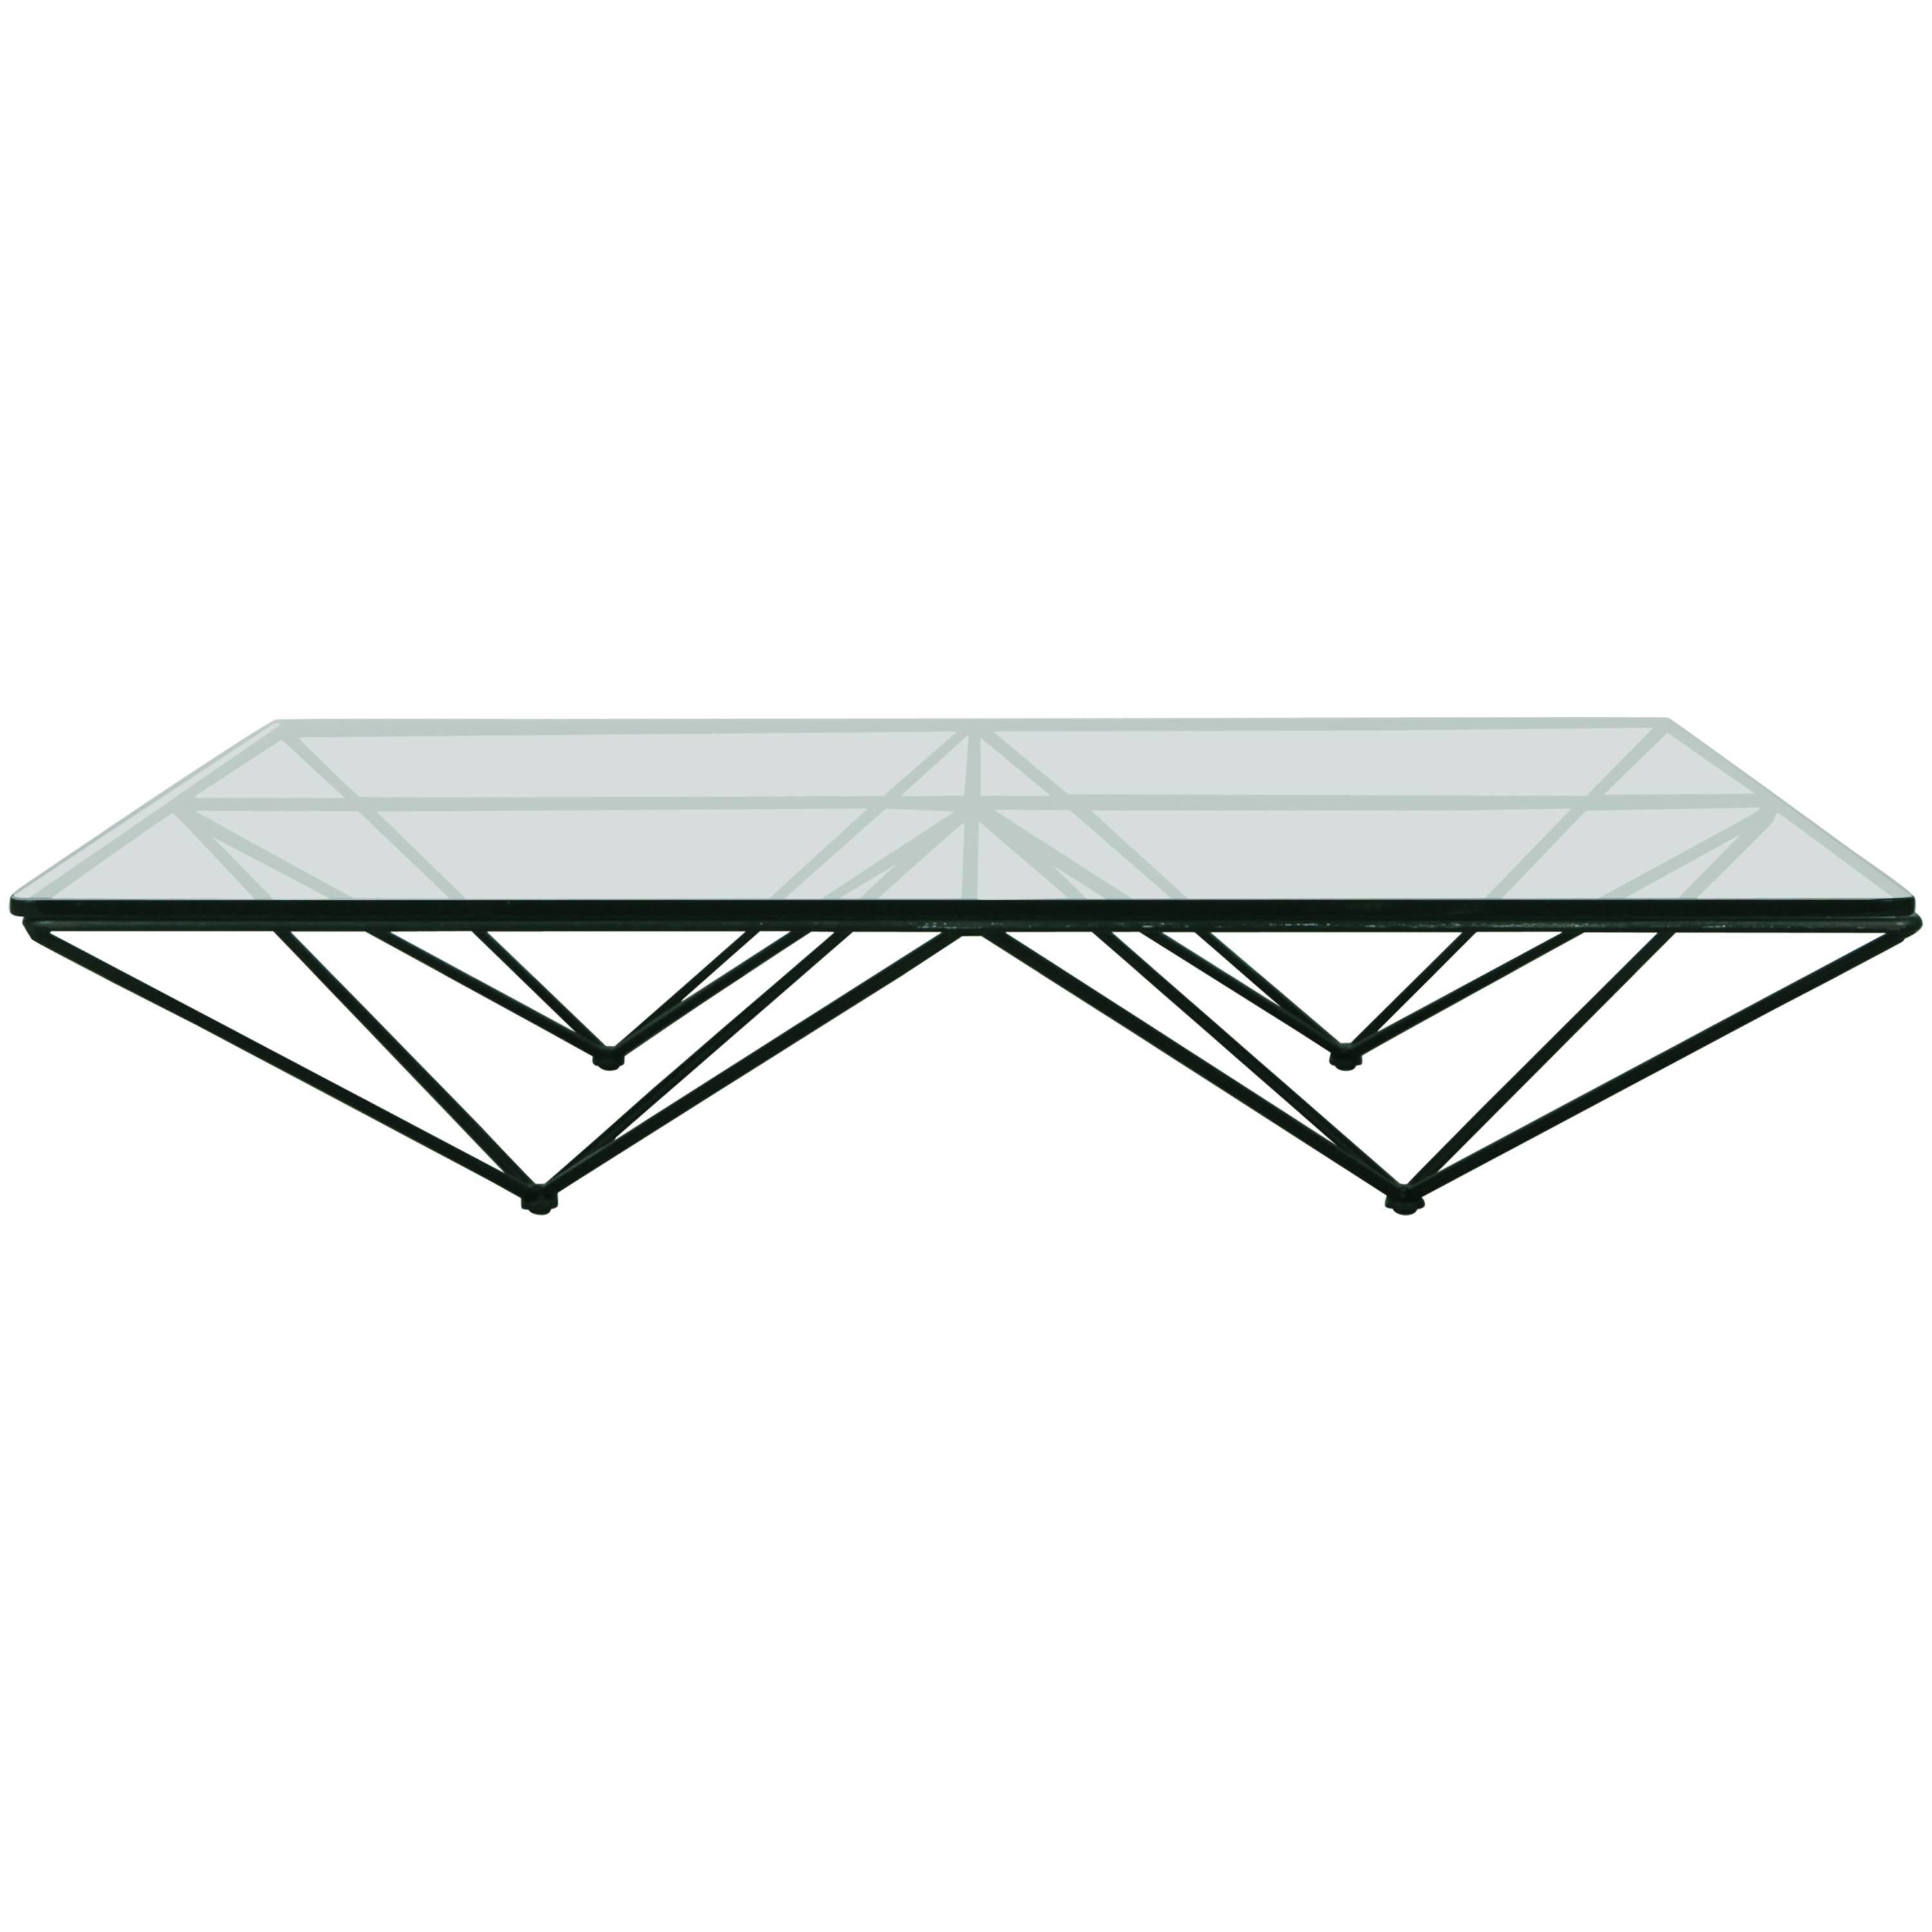 Italian Metal and Glass Coffee Table by Paolo Piva for B&B, Italia